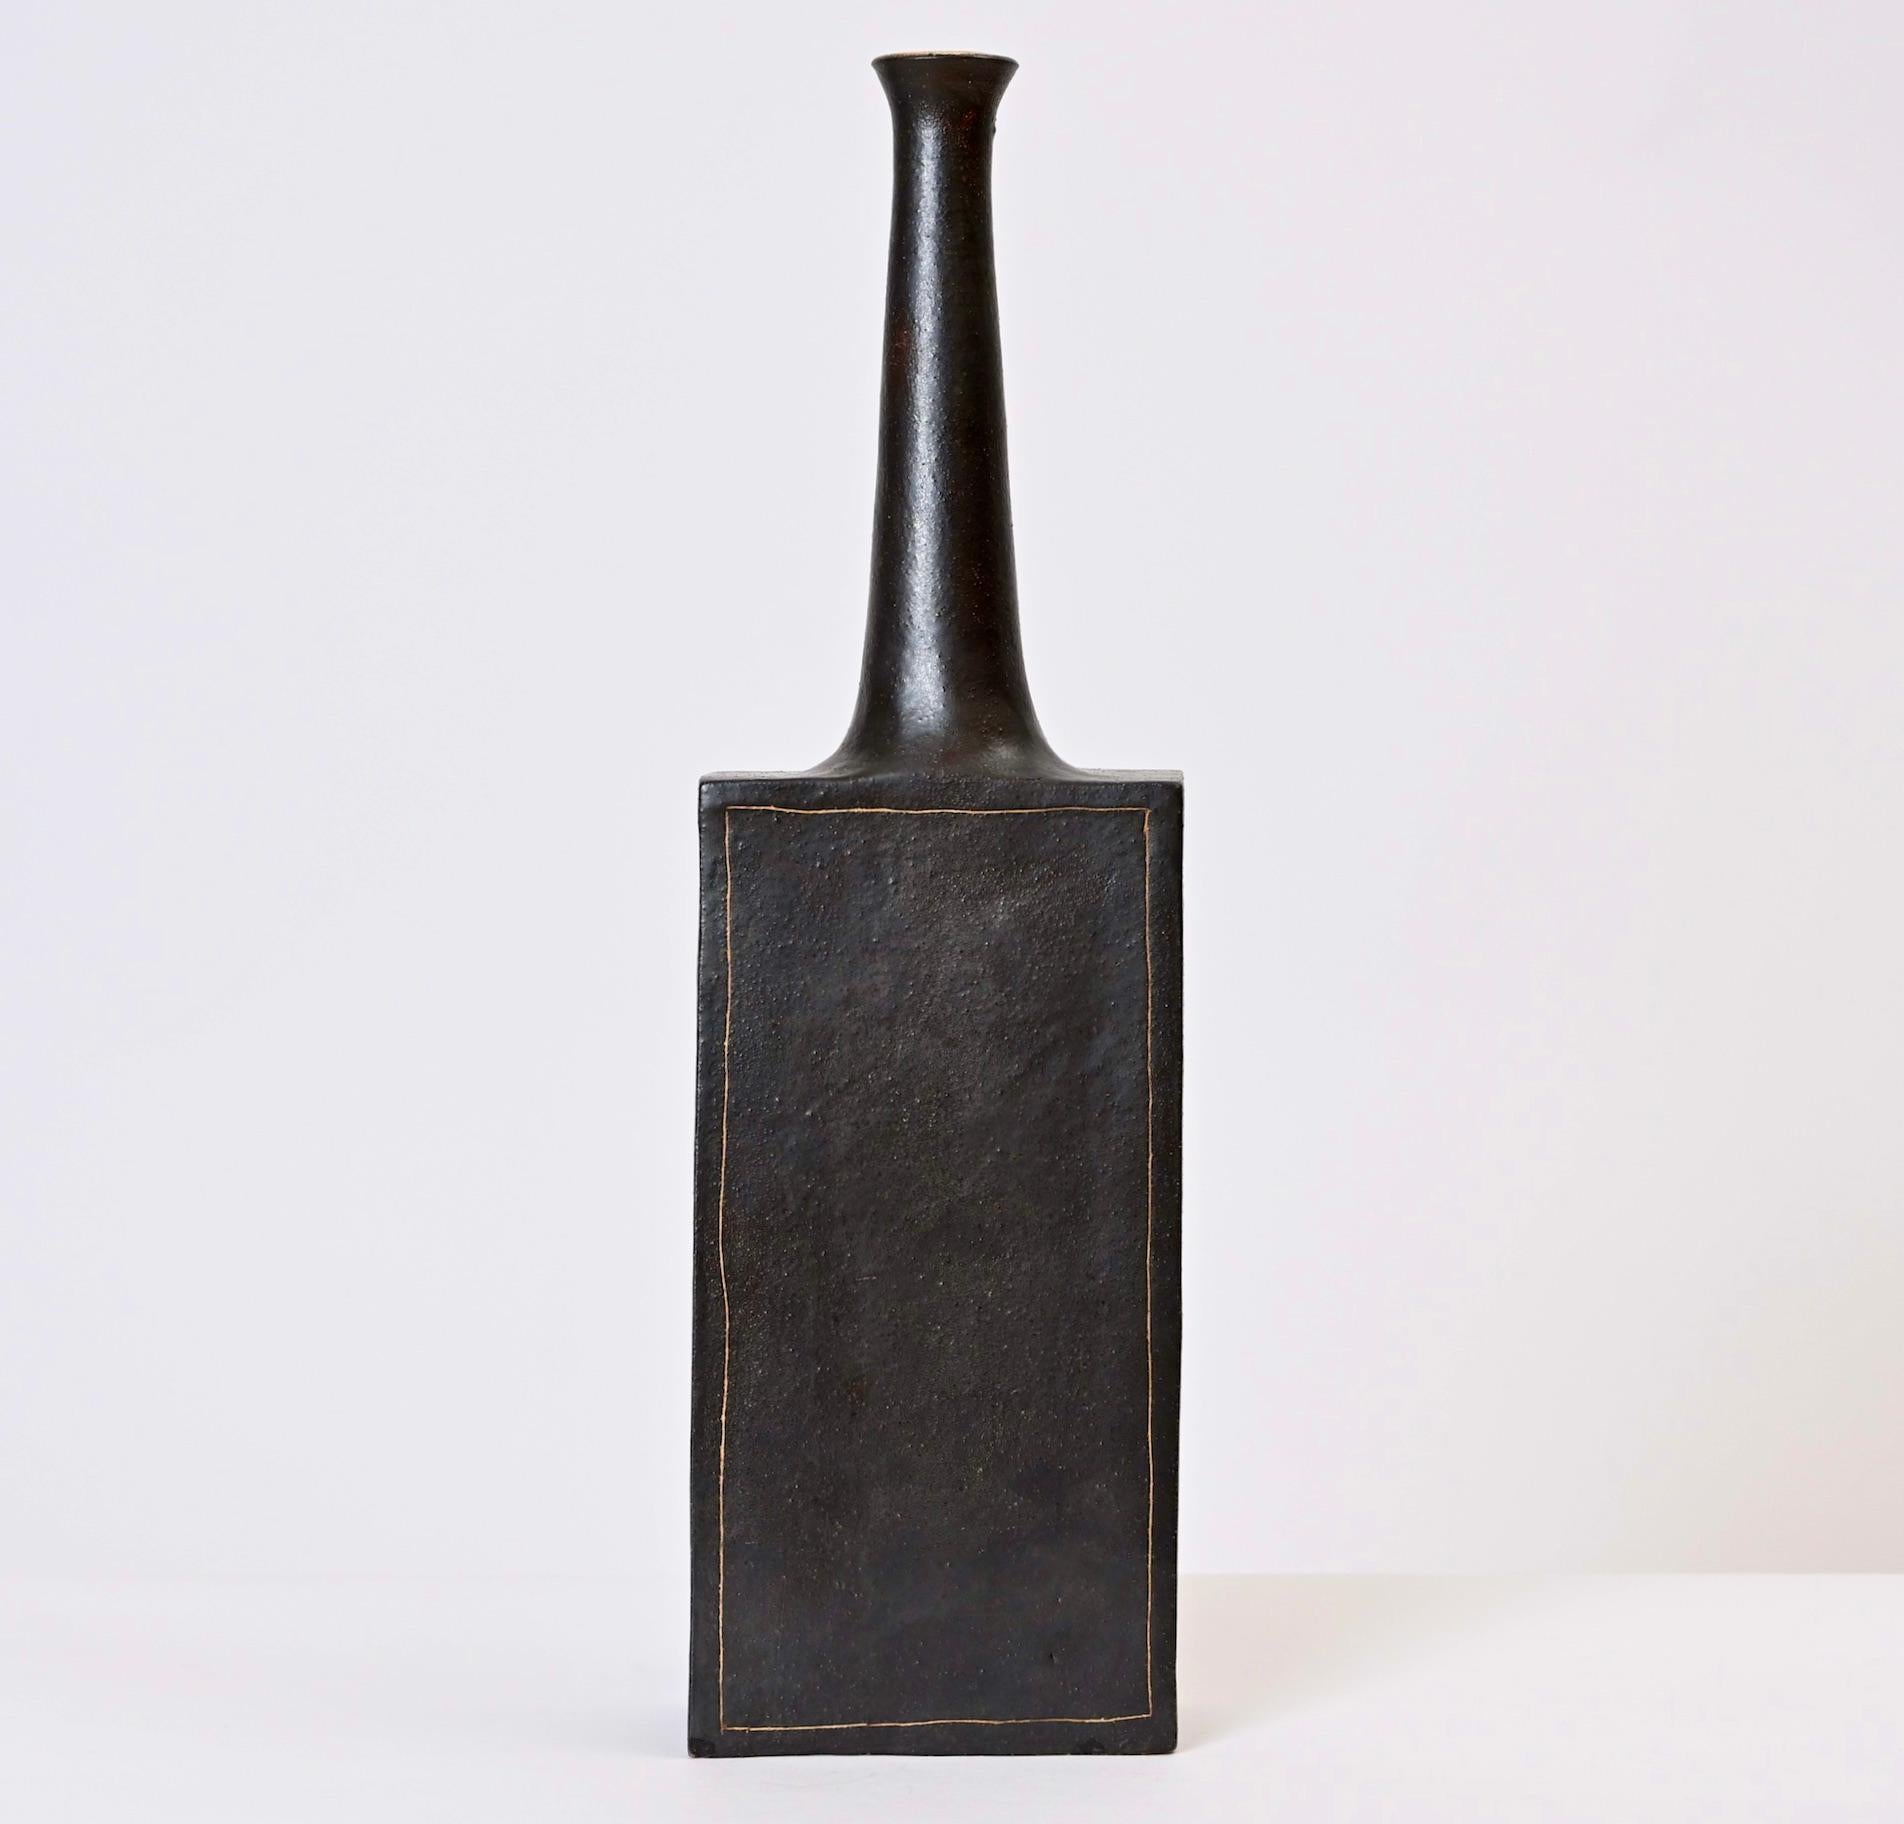 This glazed earthenware vase by Bruno Gambone was designed and manufactured in the same Florentine studio that was established by his famous ceramicist father, Guido. Produced in the 1970s, this tall and slender vase and is dark grey in colour and